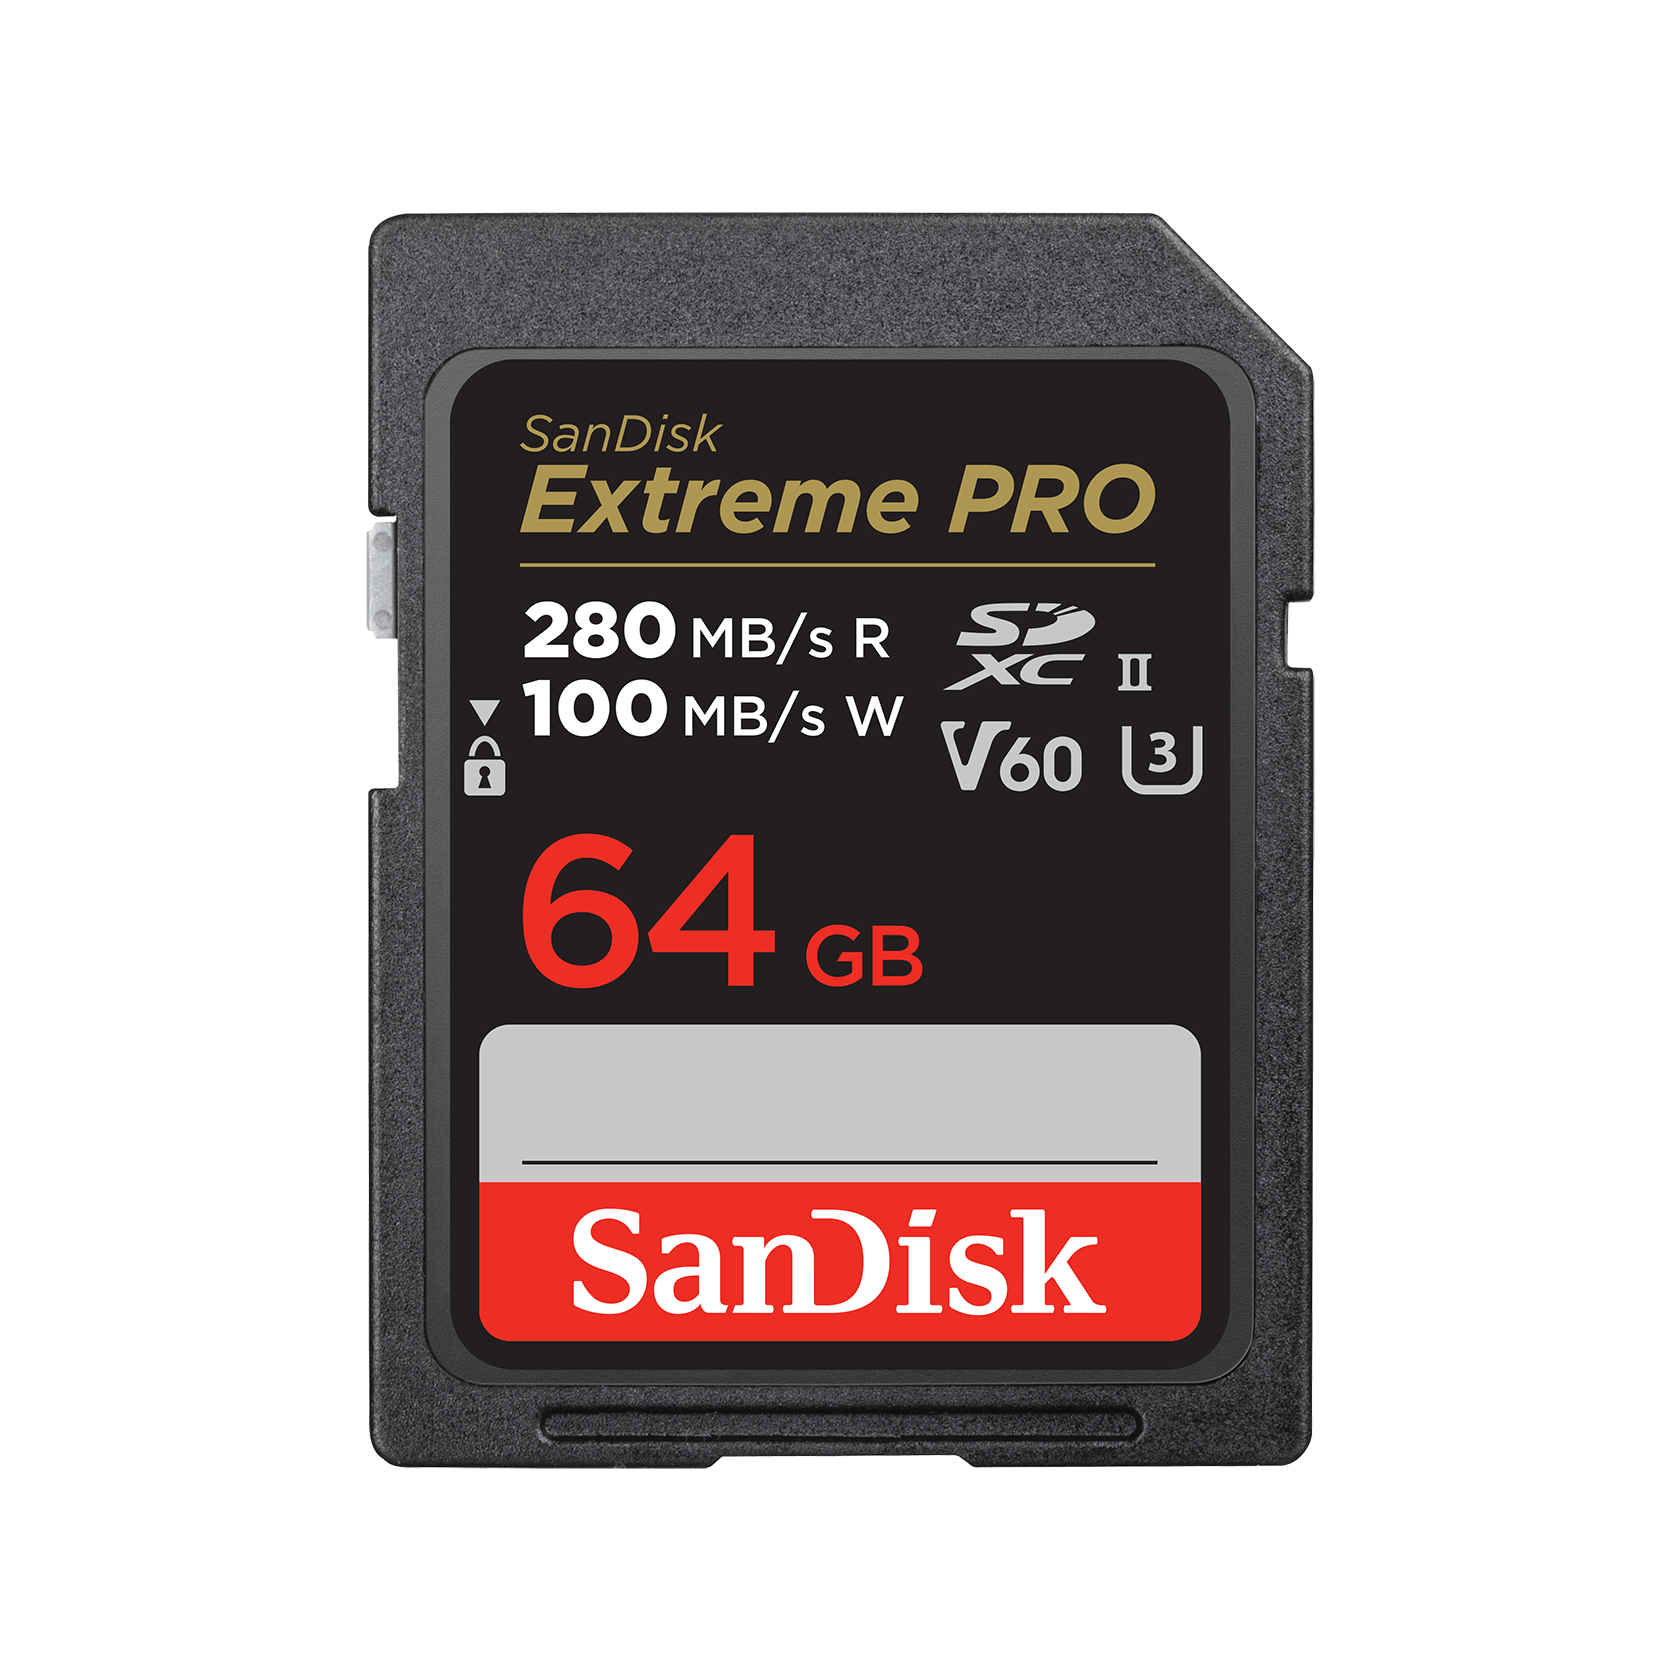 SanDisk Extreme PRO SDXC™ UHS-II Card - 64GB - SDSDXEP-064G-GN4IN